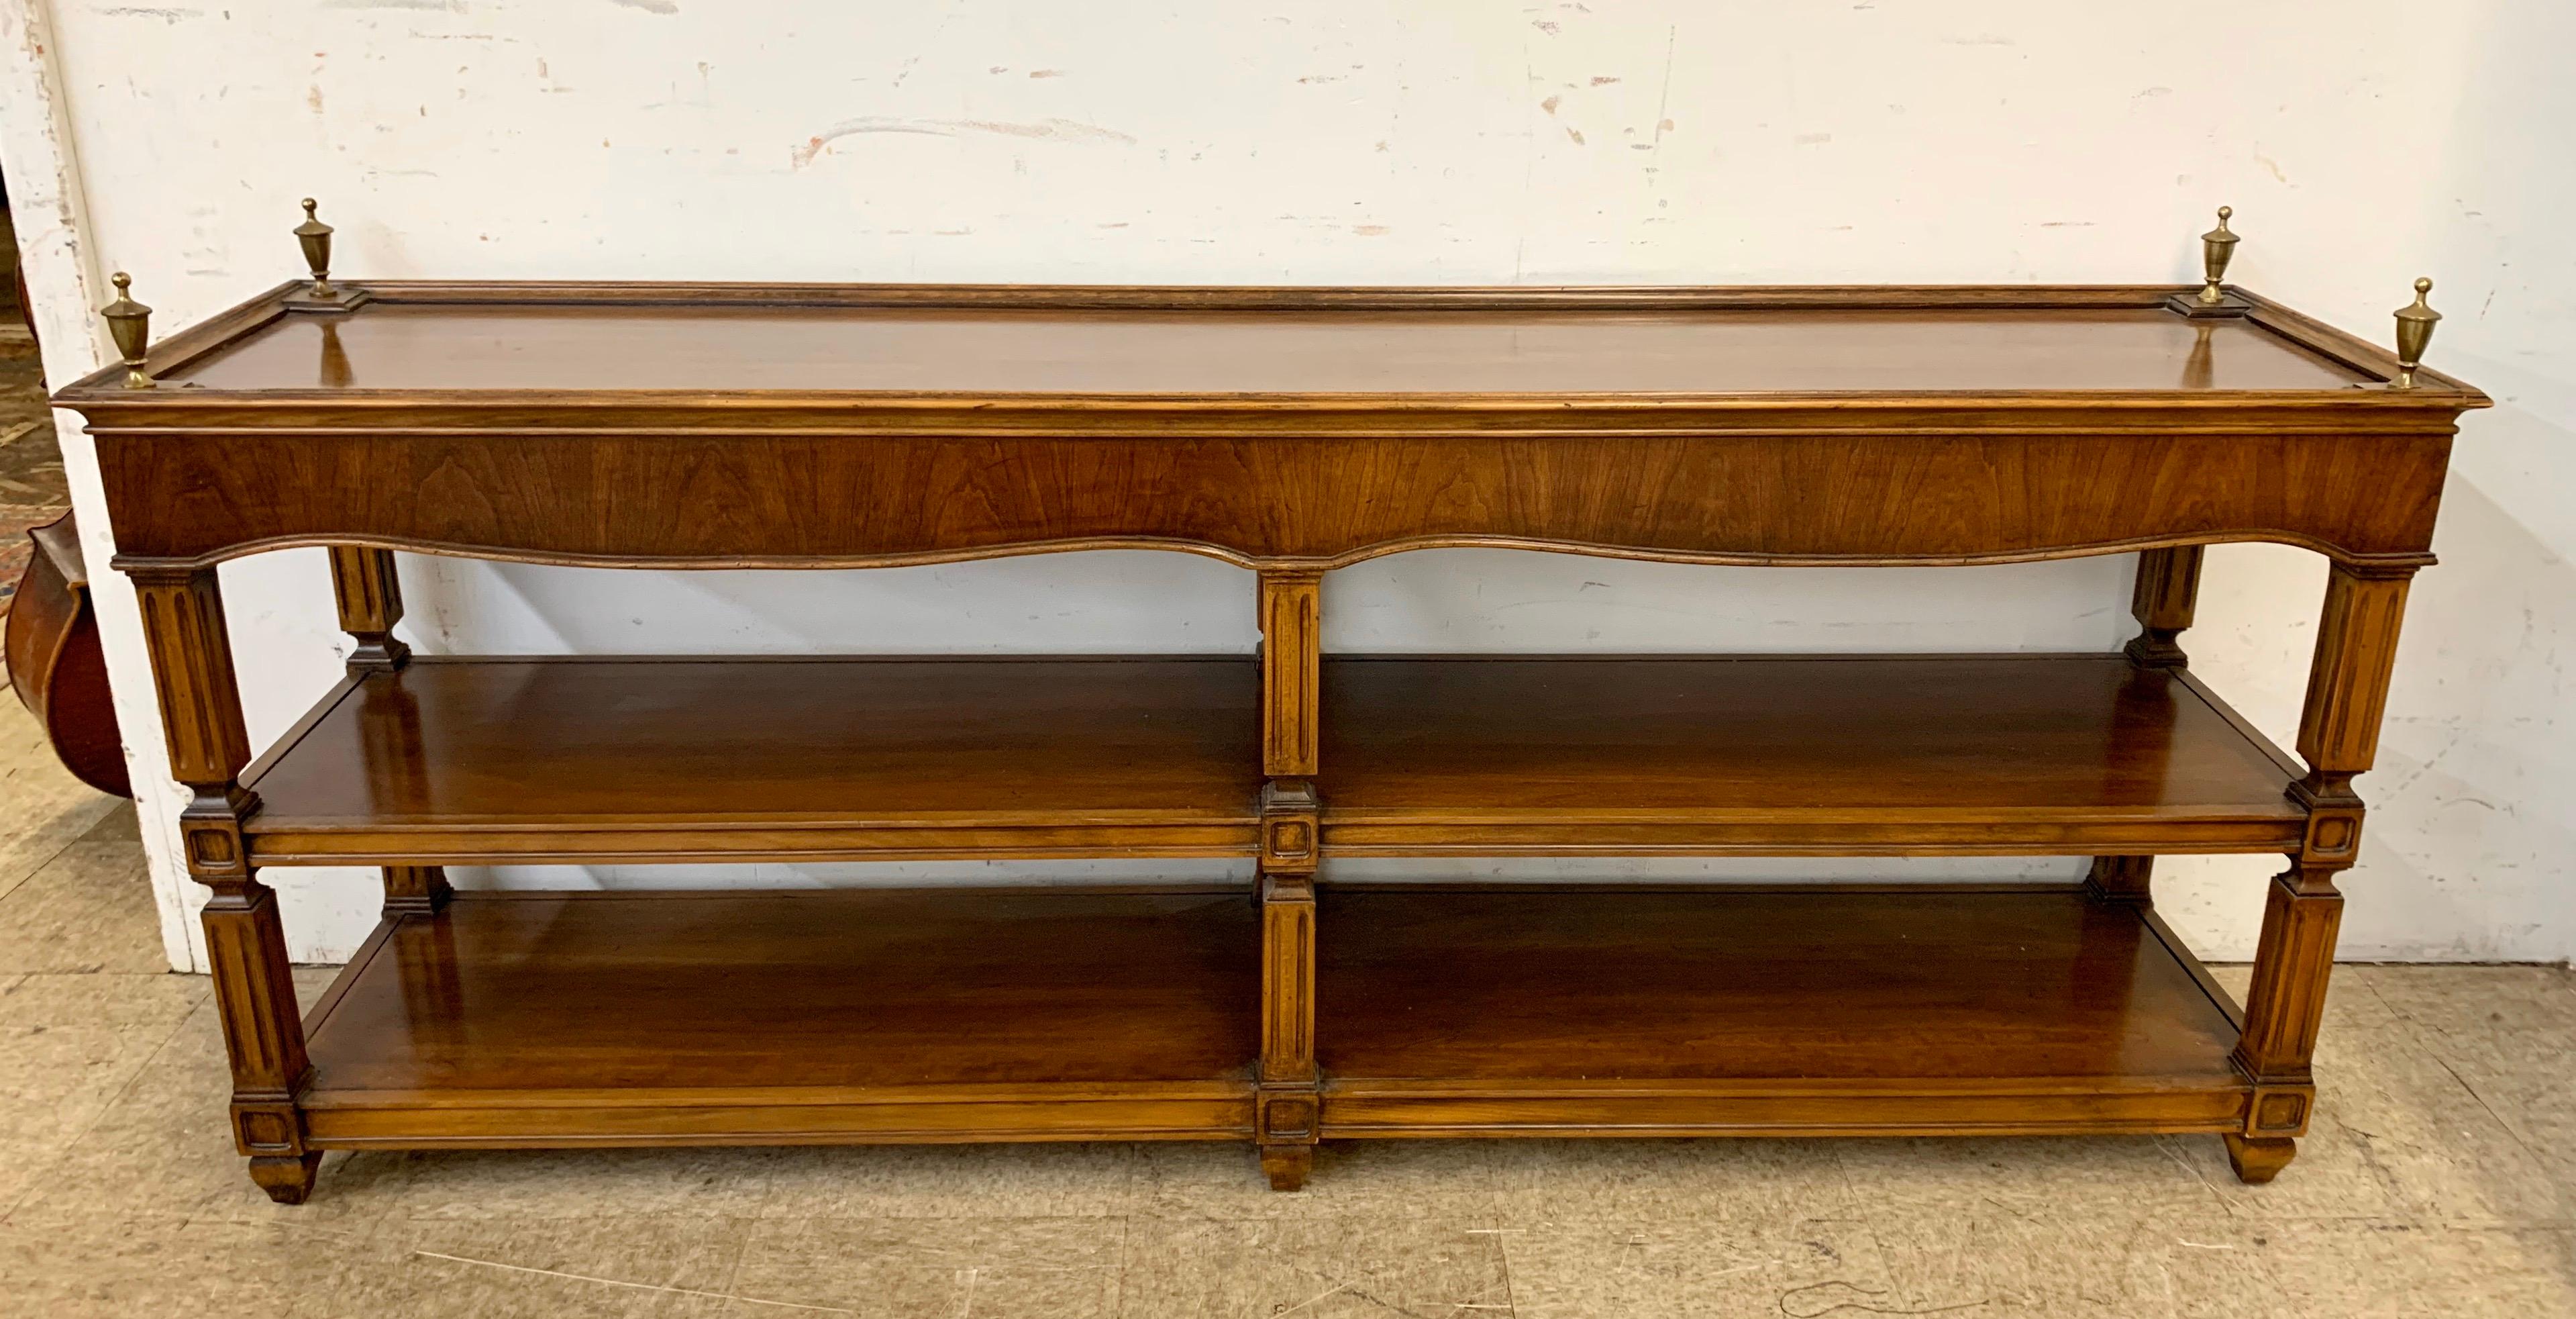 Neoclassical mahogany console table with open shelves and four fluted legs with brass finials. Perfect in your foyer or behind a sofa. Height is 27.25